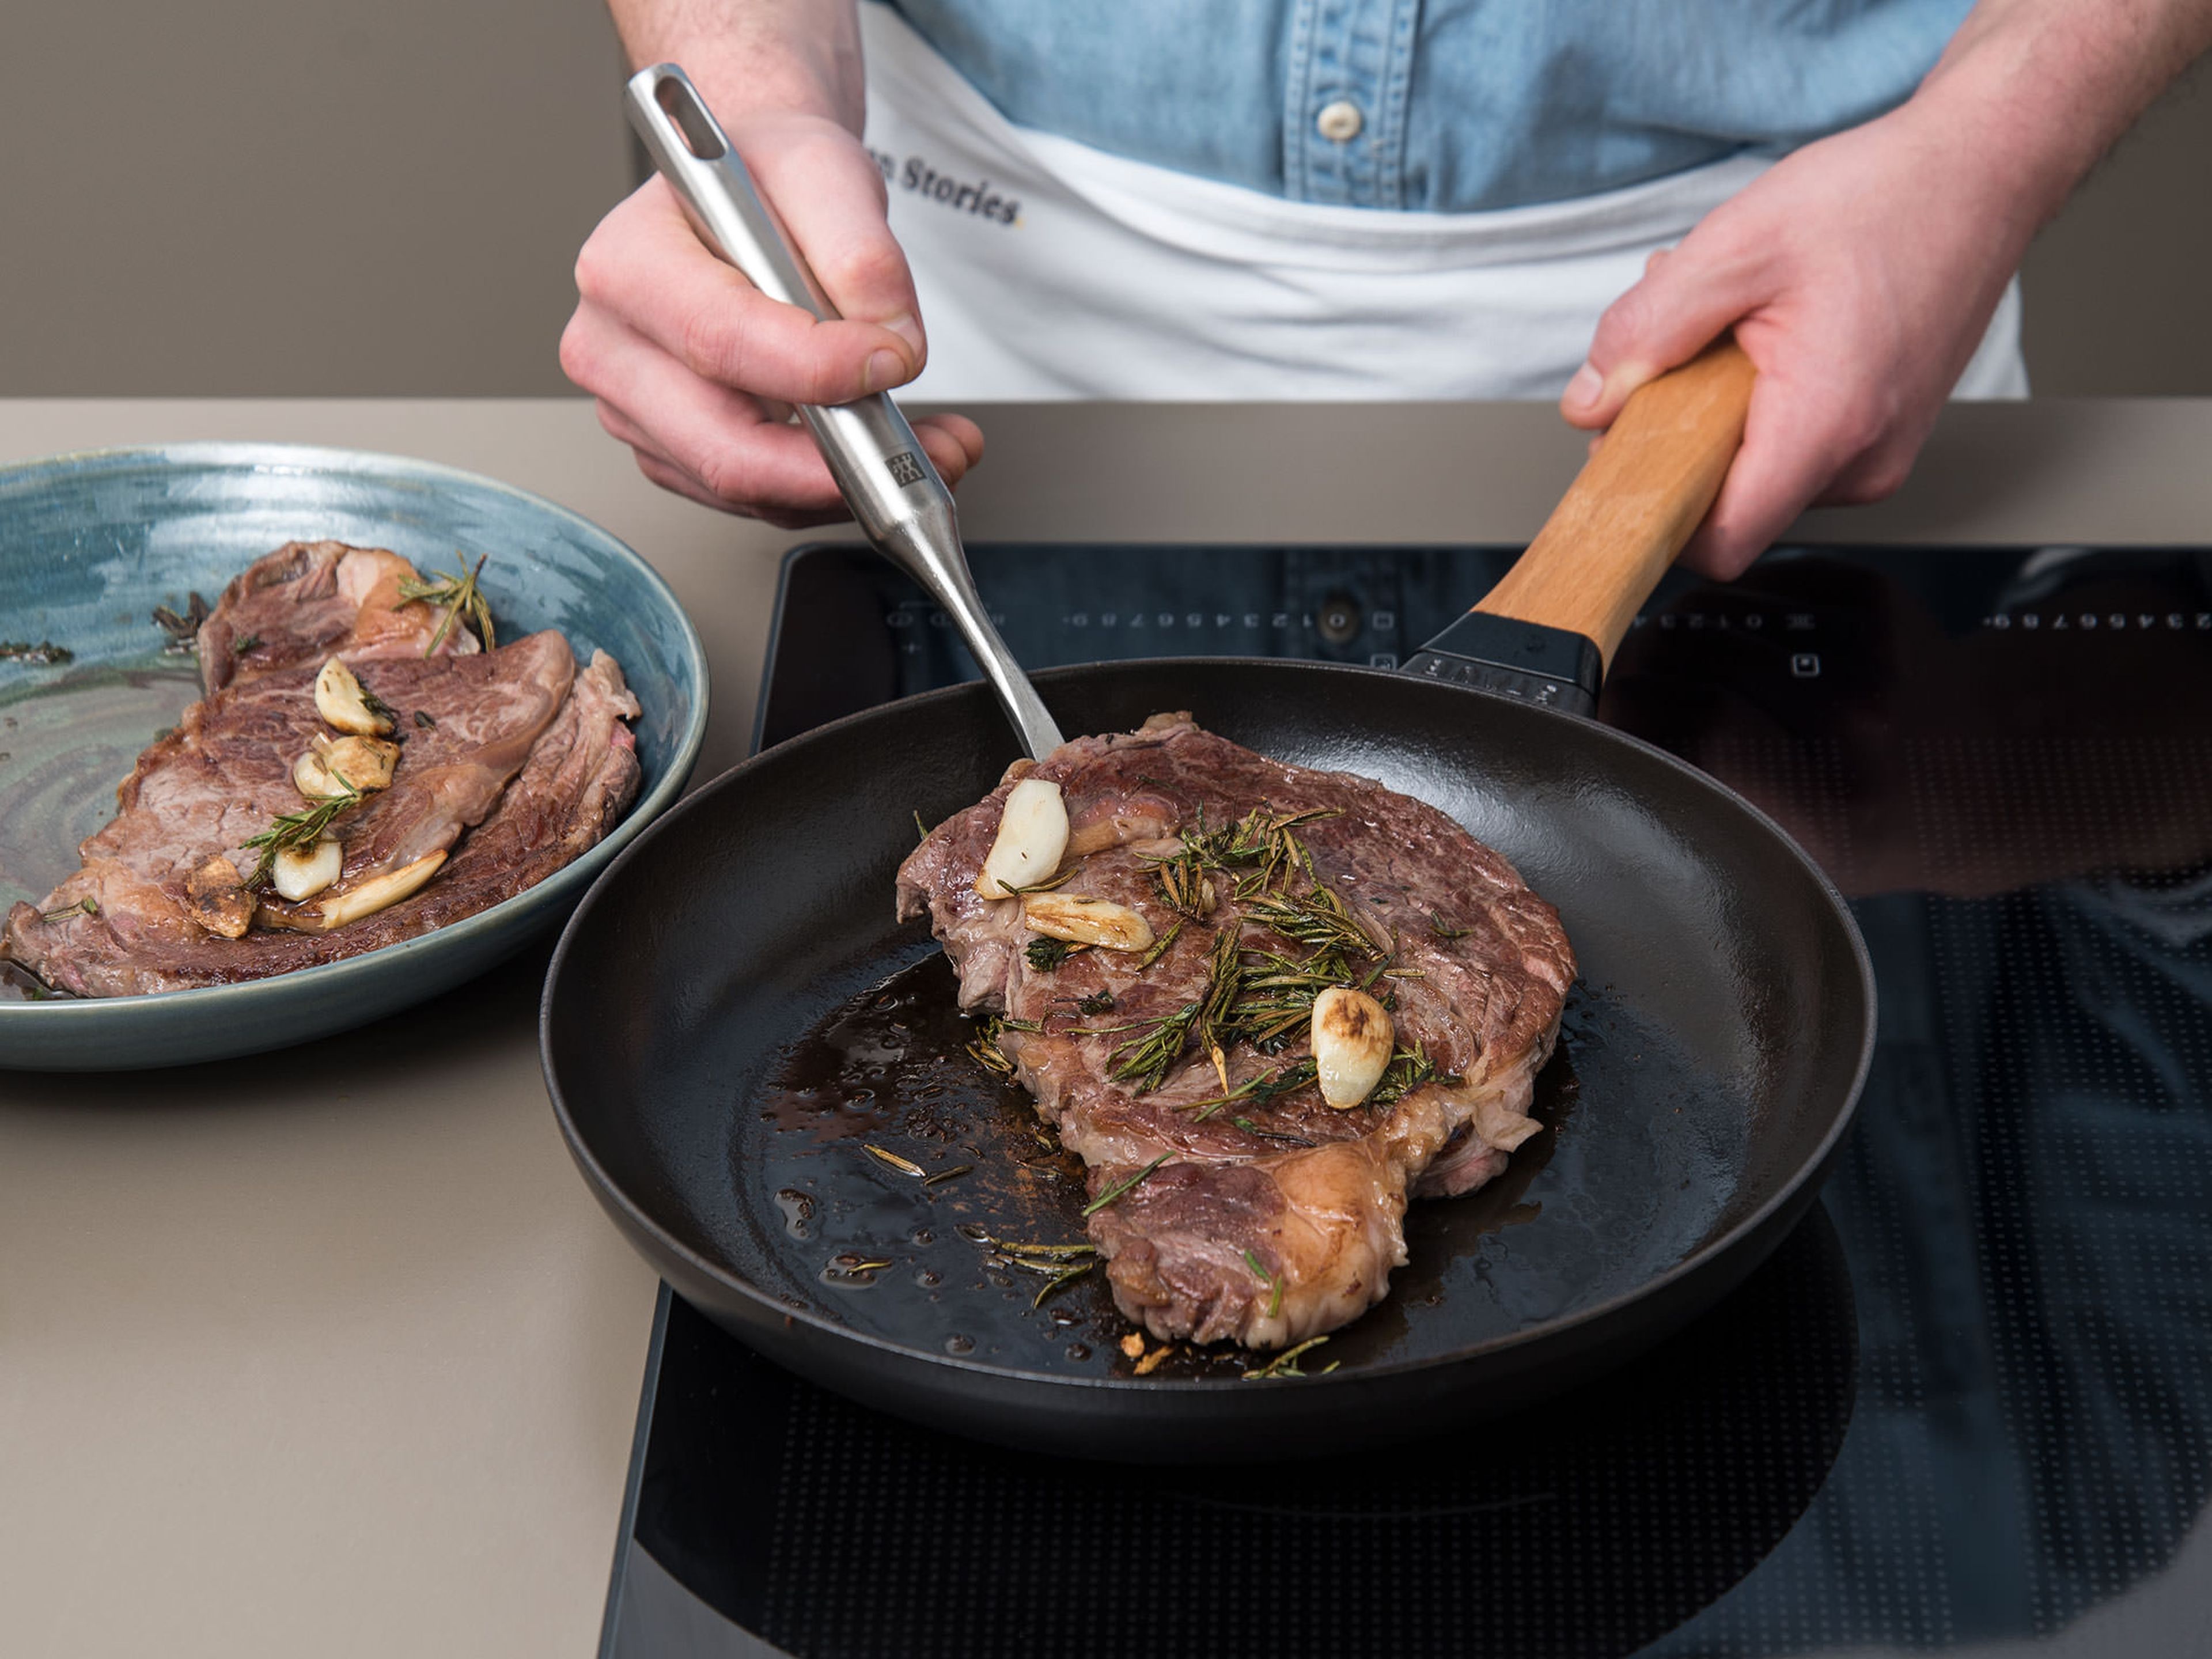 Meanwhile, pre-heat oven to 60°C/120°F. Heat a cast iron pan over medium-high heat. Once pre-heated, remove steaks from freezer bag and transfer them to the pan, together with herbs and garlic. Sear for approx. 4 – 5 min. on both sides. Transfer steaks, herbs, and garlic to a soup plate. Cover with another plate and let rest in the oven at 60°C/120°F for approx. 8 – 10 min.